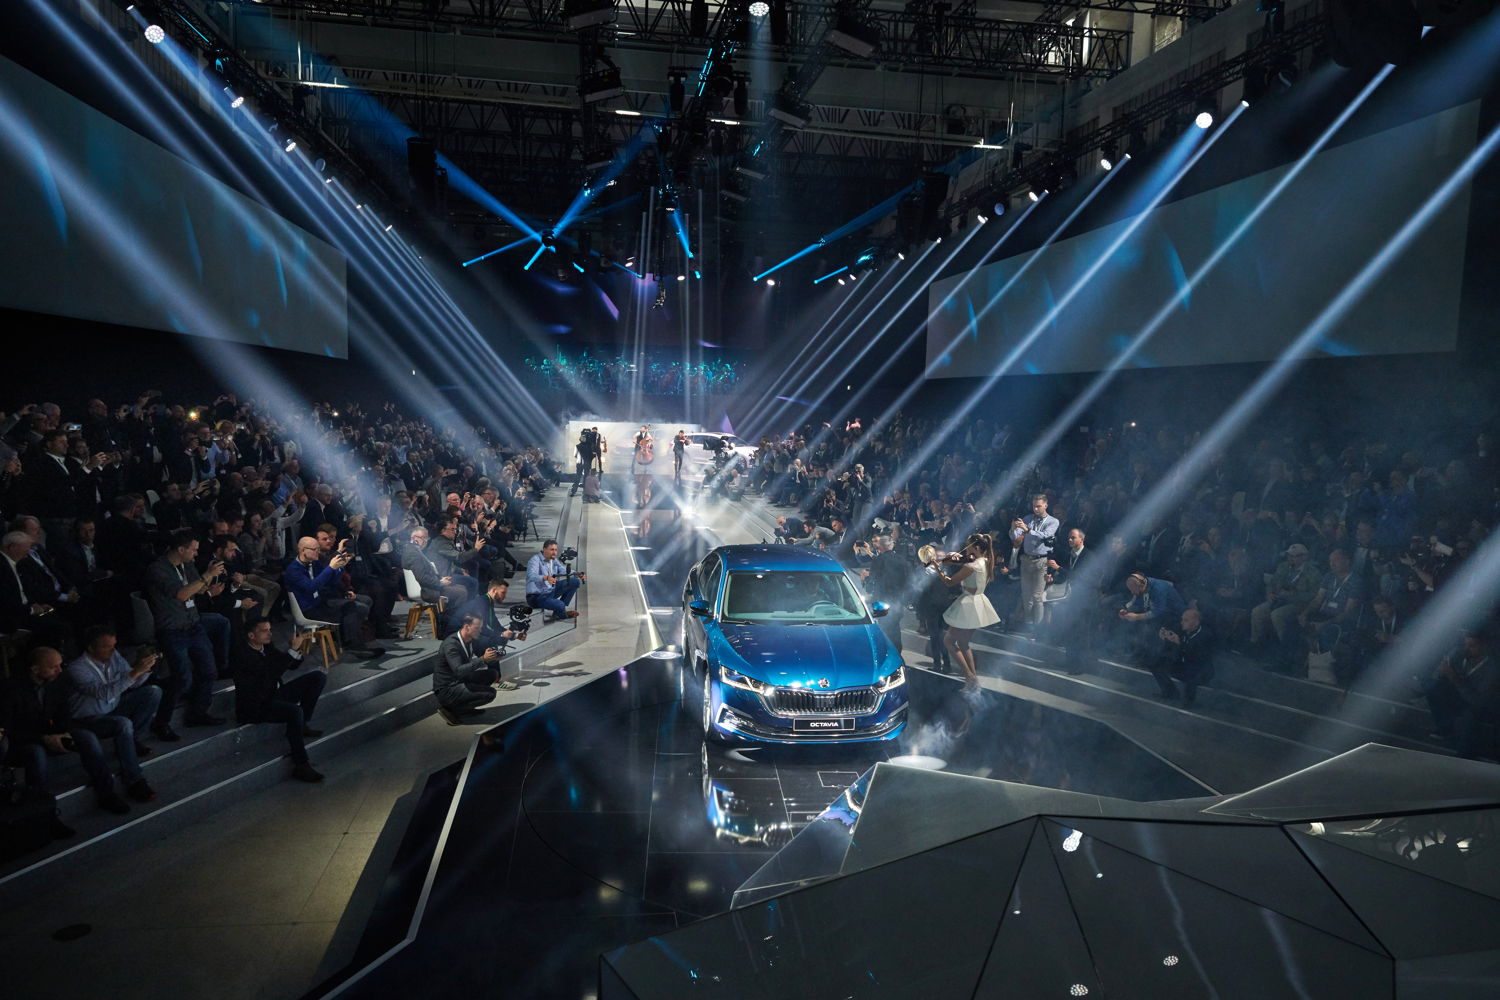 700 guests, among them many VIPs, were present on Monday night at the Prague National Gallery's Trade Fair Palace to witness ŠKODA introduce the fourth-generation ŠKODA OCTAVIA.